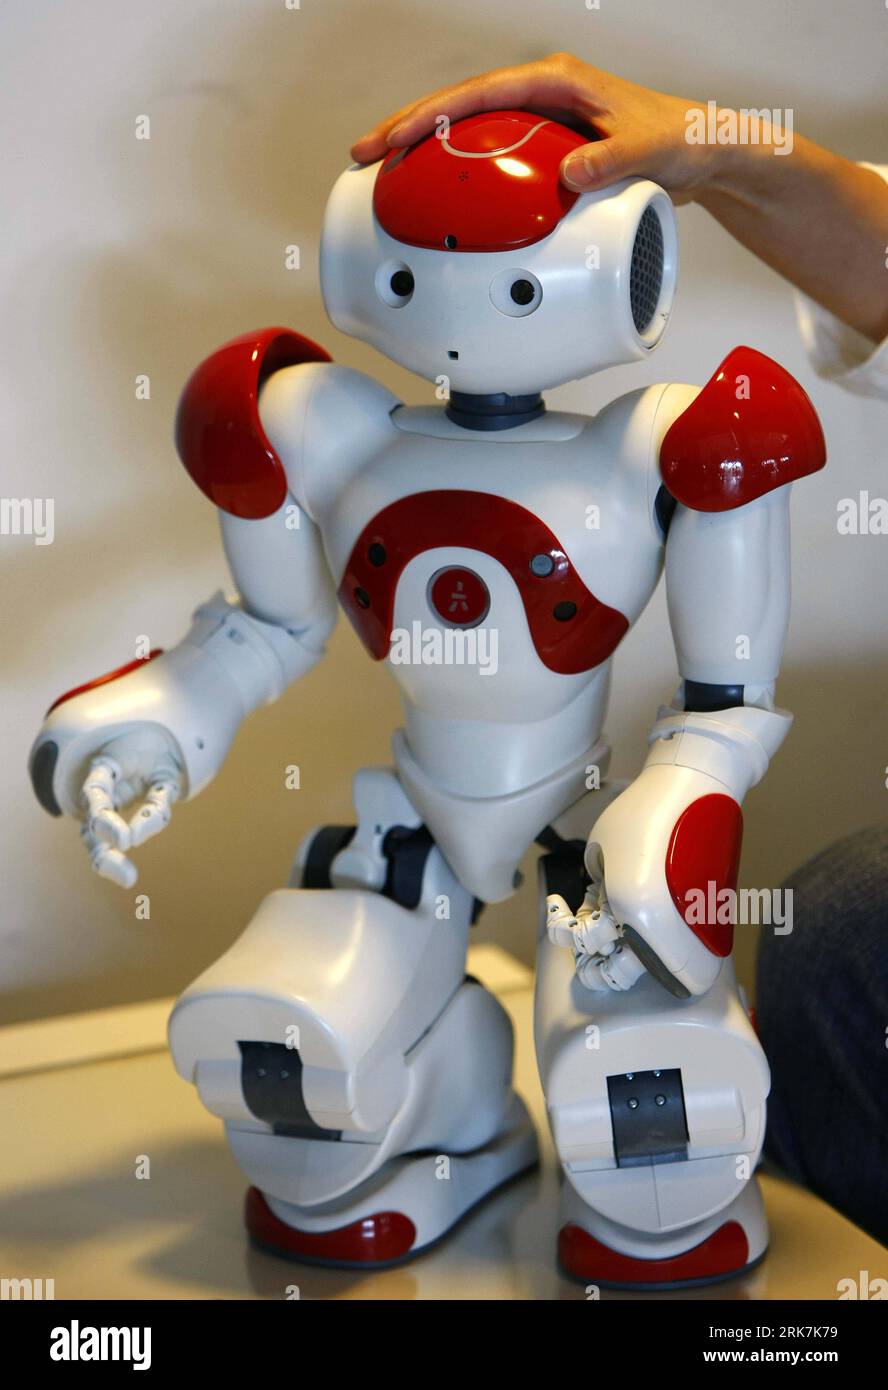 Bildnummer: 53923448  Datum: 06.04.2010  Copyright: imago/Xinhua (100407) -- PARIS, April 7, 2010 (Xinhua) -- A robot named Nao and developed by France s Aldebaran company is displayed to in Paris April 6, 2010. The robot can speak fluent English, French and Chinese. It will be displayed at the Shanghai World Expo as the mascot of French Pavilion. (Xinhua/Zhang Yuwei) (dyw) (5)FRANCE-PARIS-ROBOT-SHANGHAI WORLD EXPO PUBLICATIONxNOTxINxCHN Gesellschaft Wirtschaft Weltausstellung Roboter kbdig xub 2010 hoch     Bildnummer 53923448 Date 06 04 2010 Copyright Imago XINHUA  Paris April 7 2010 XINHUA Stock Photo